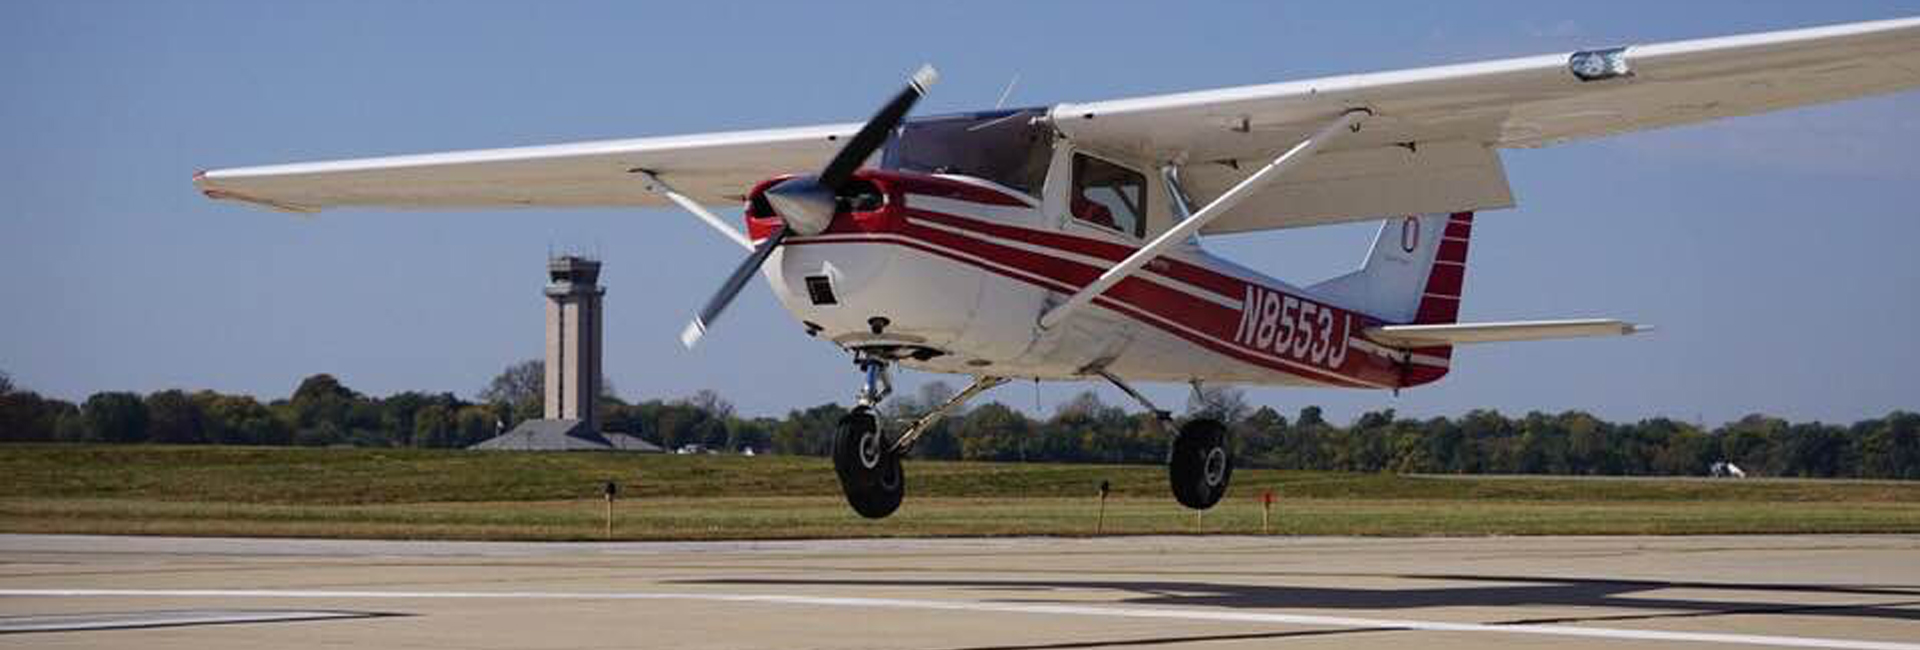 One of the team's Cessna 150's touches down during a landing competition.